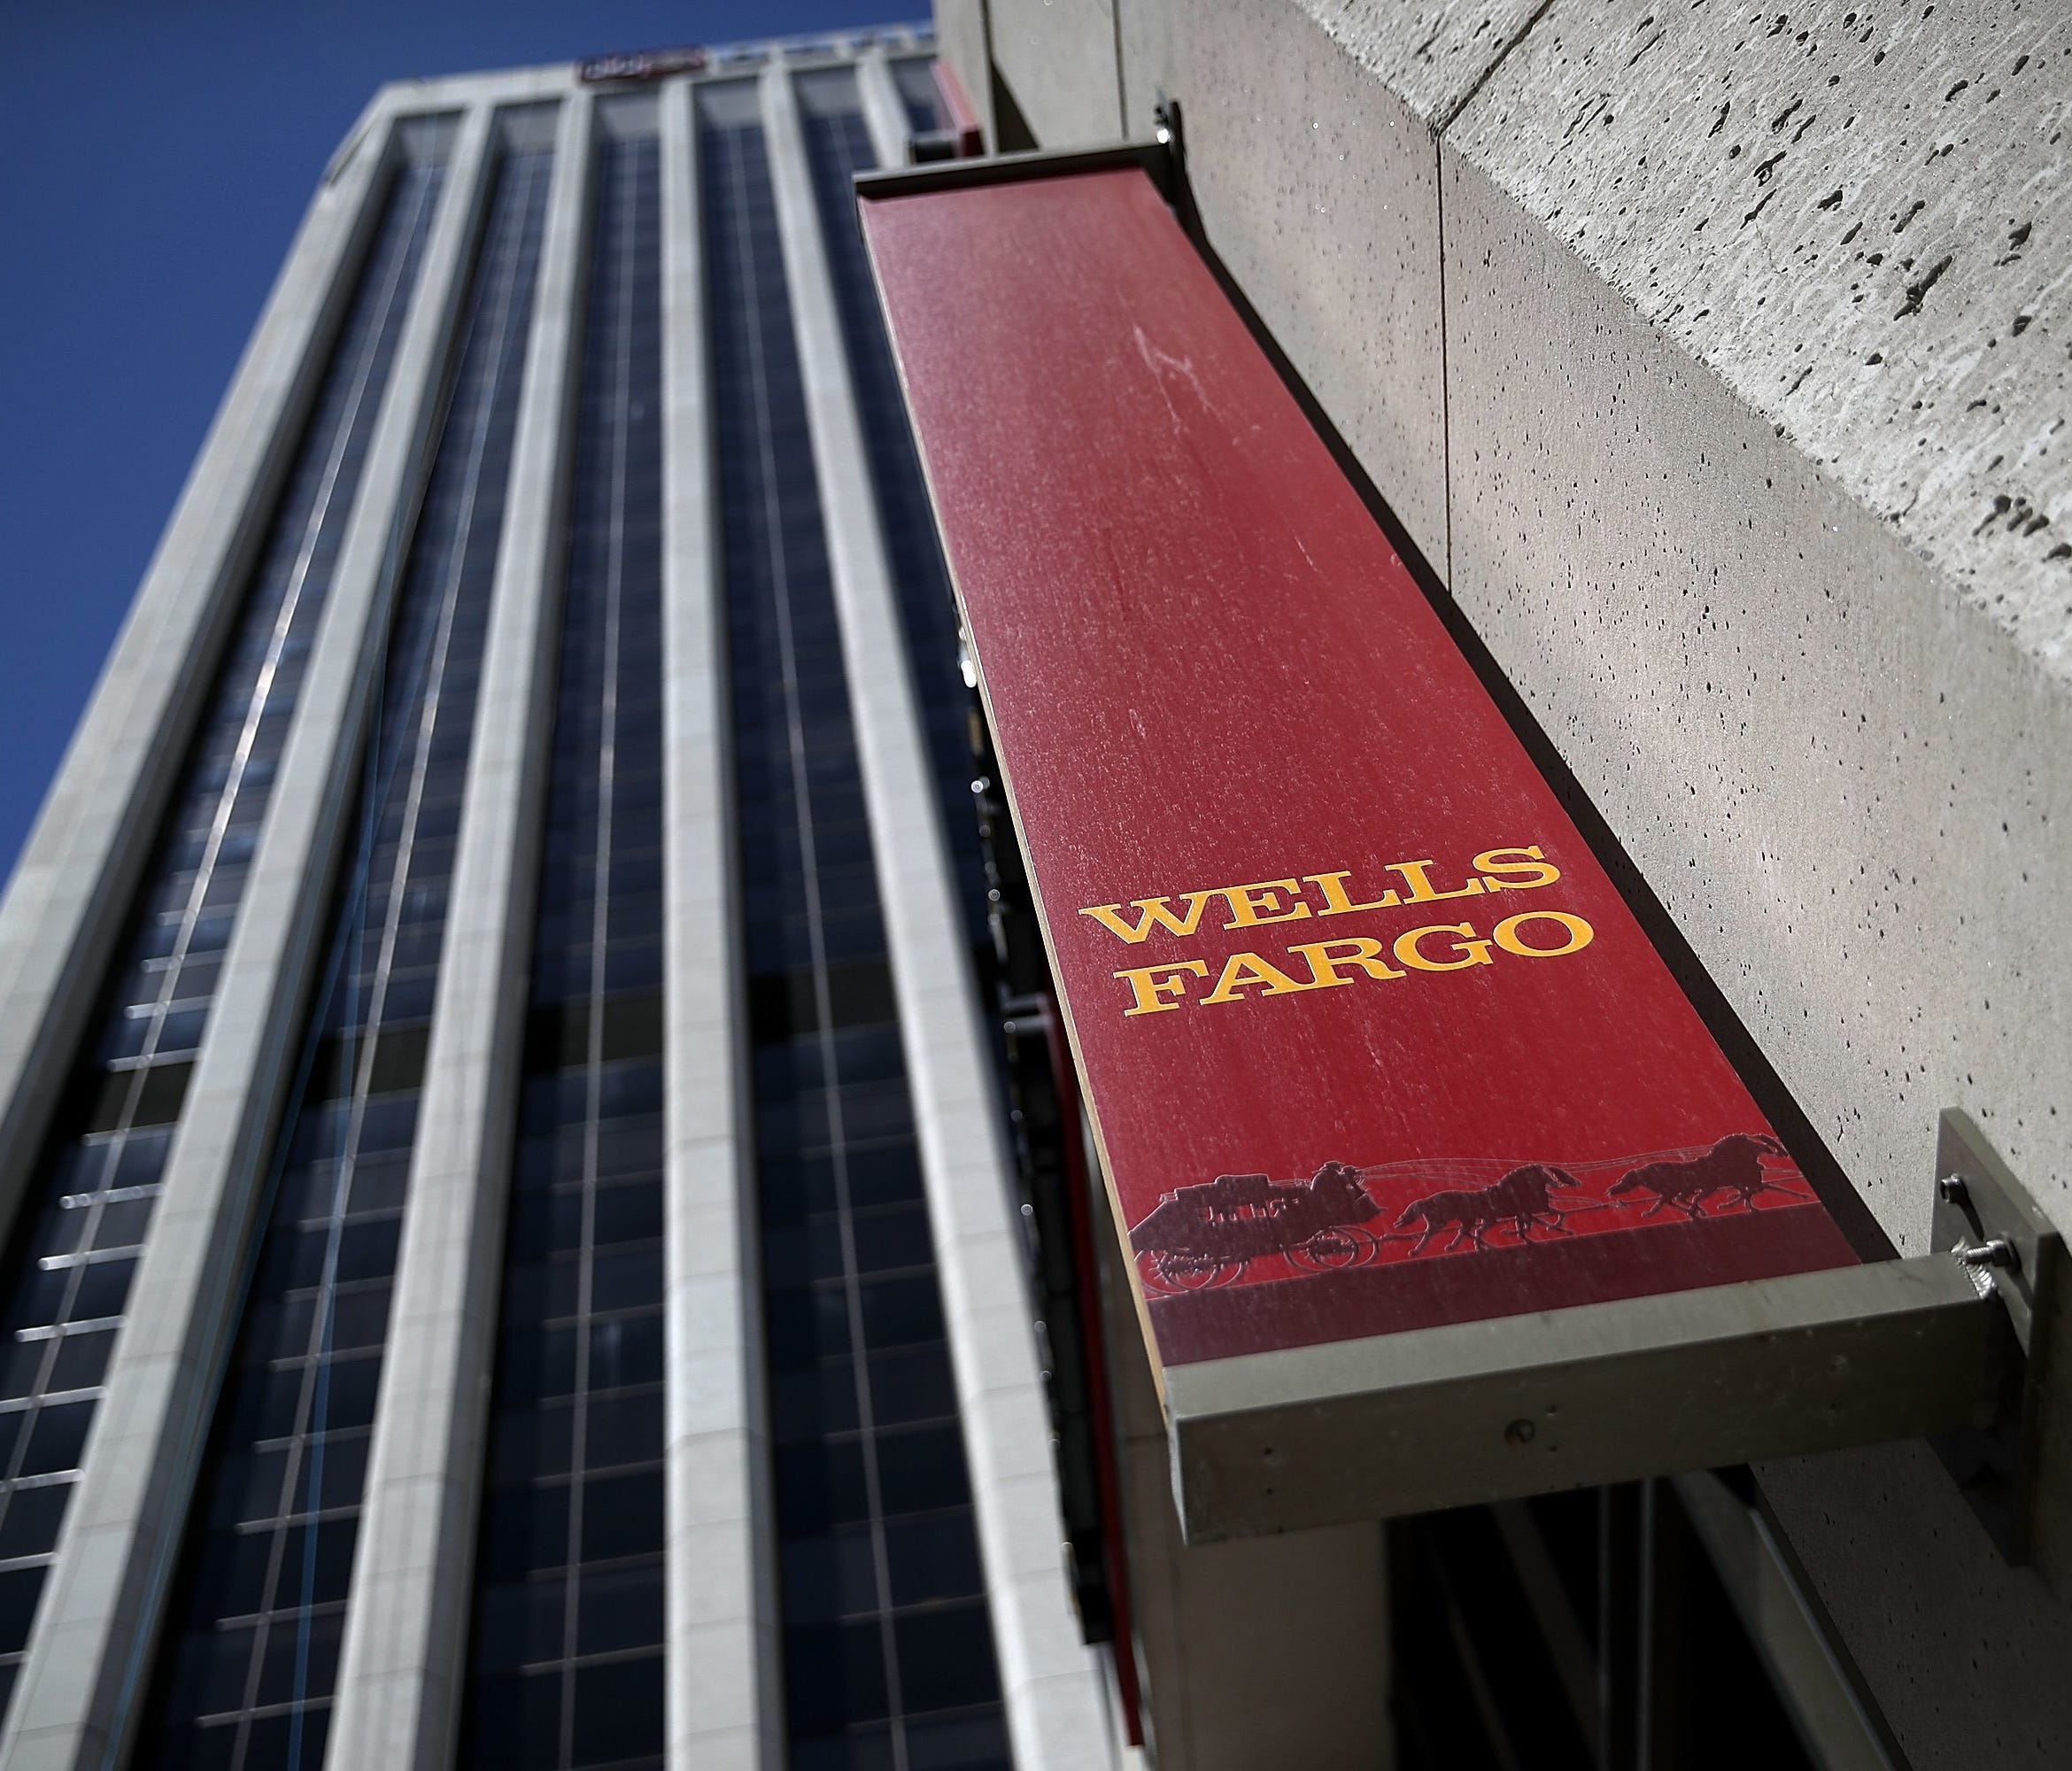 File photo taken in 2017 shows a Wells Fargo sign outside one of the bank's branches in San Francisco, Ca.